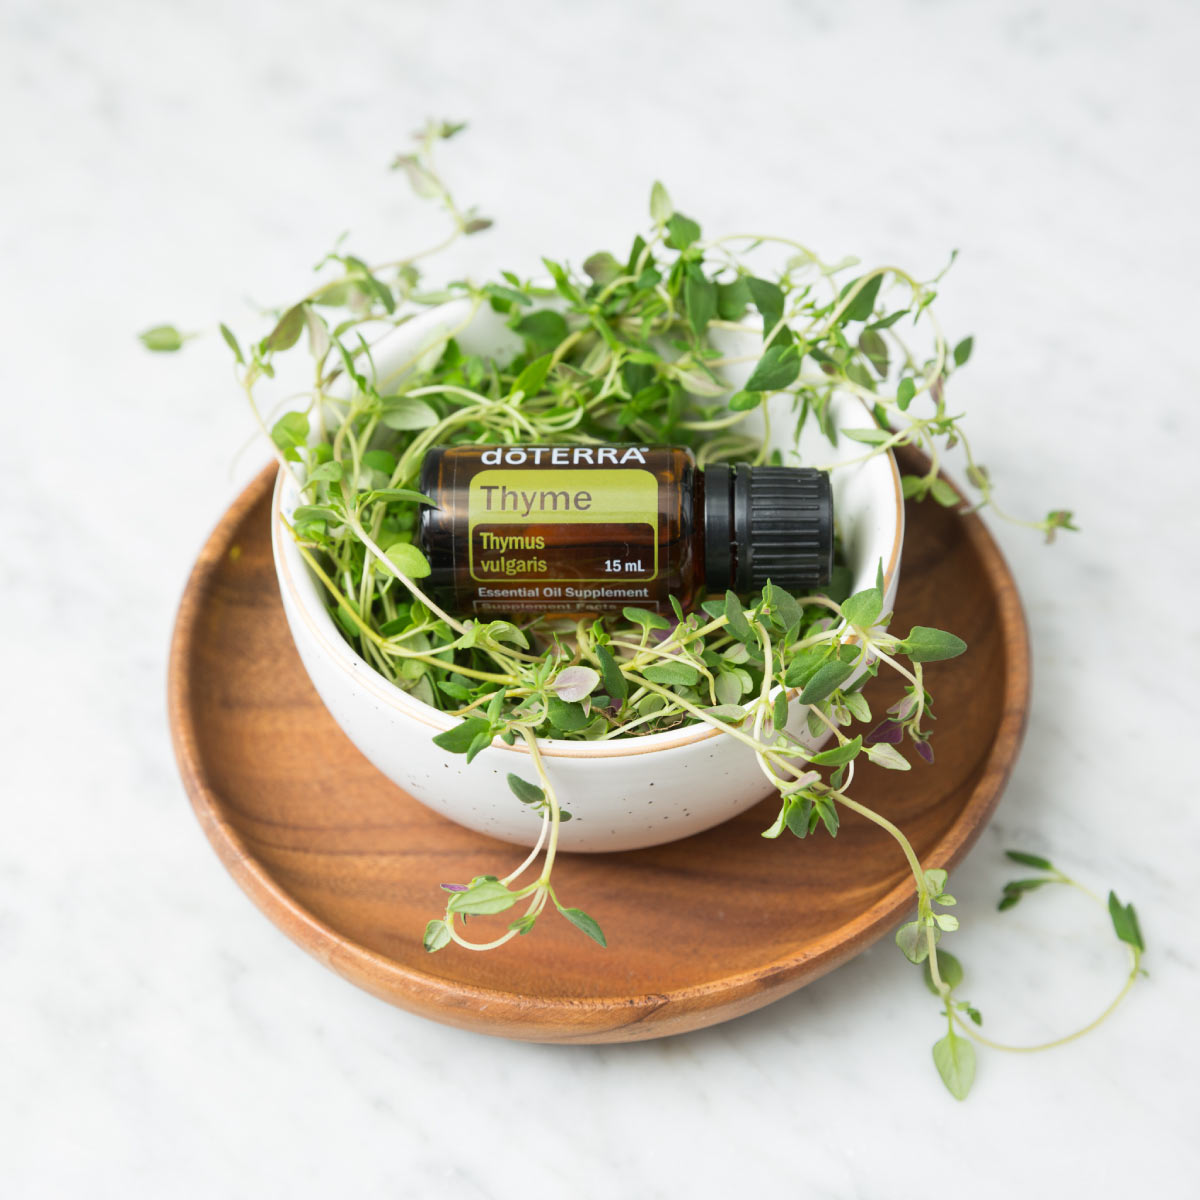 Bottle of Thyme oil surrounded by green leaves in a small white bowl sitting on a wooden dish. How do you use Thyme essential oil? You can use Thyme essential oil to promote a healthy immune system, to add flavor when cooking, or to repel insects. 